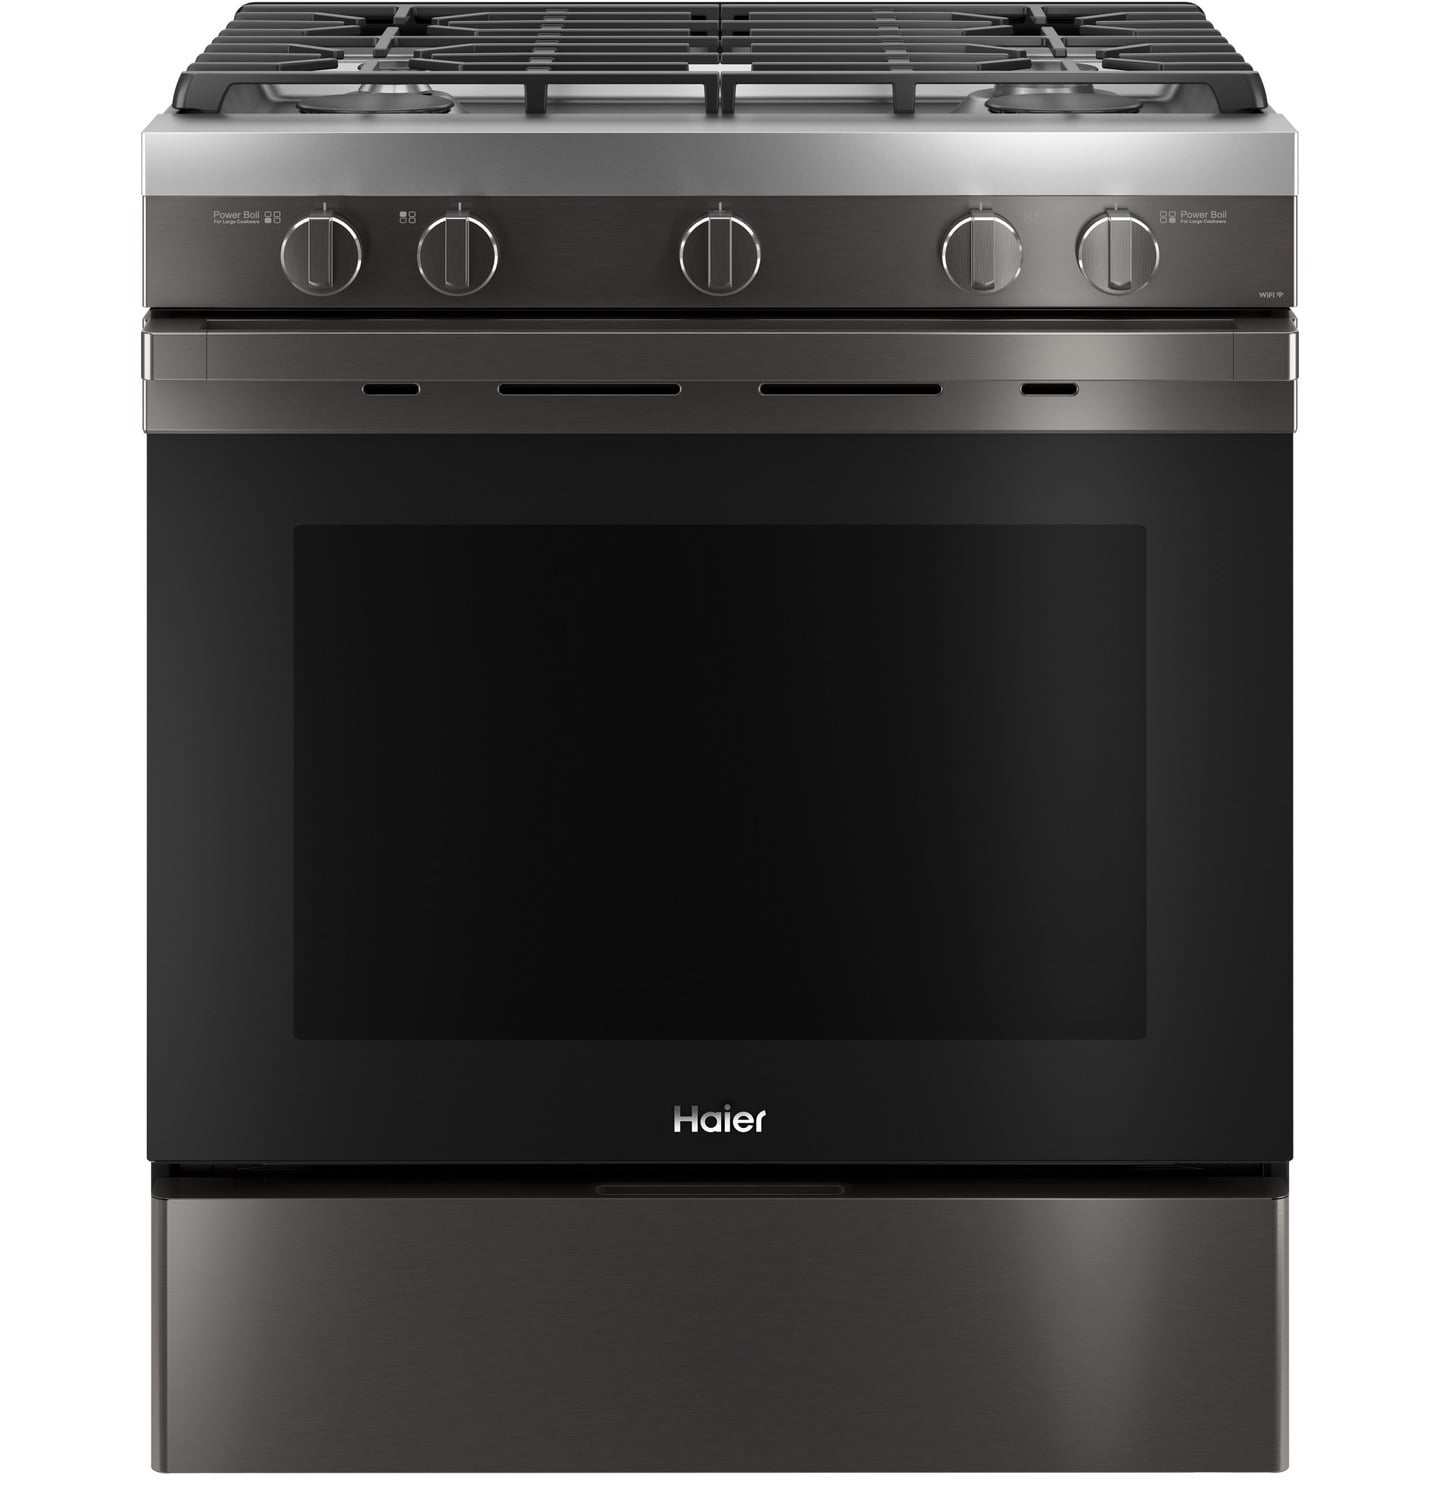 Haier QGSS740BNTS 30" Smart Slide-In Gas Range With Convection